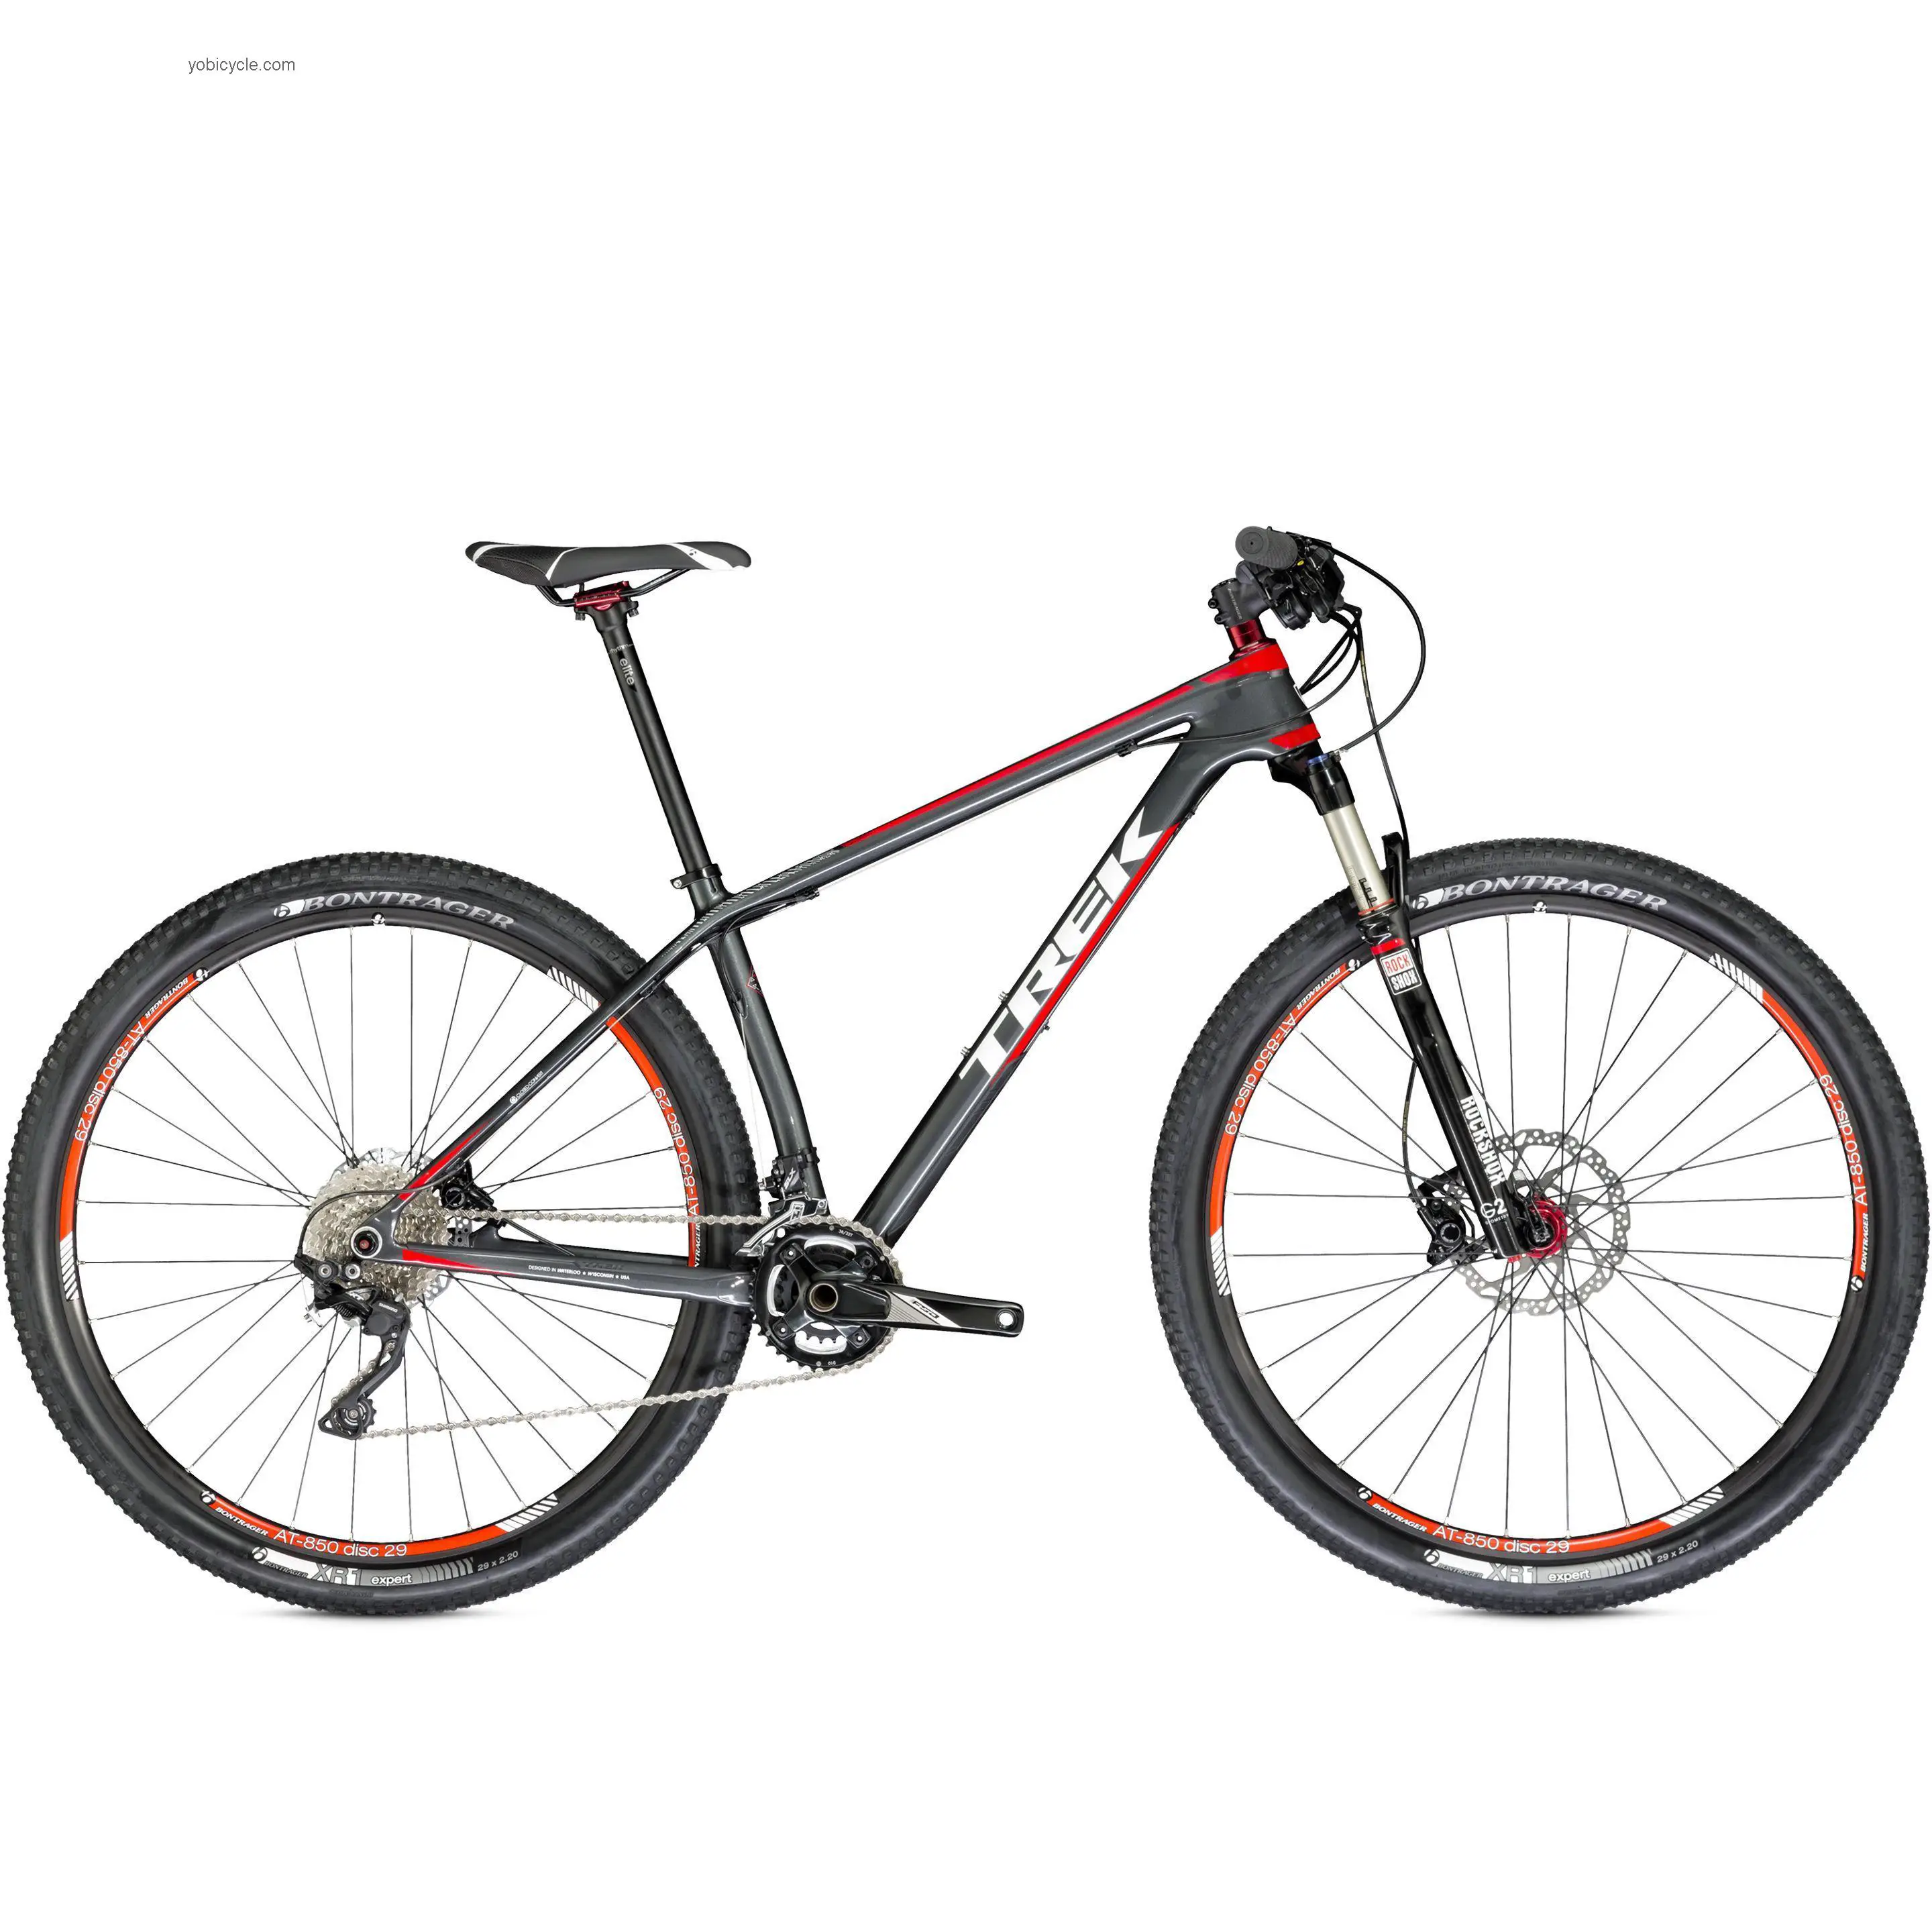 Trek Superfly 9.6 2014 comparison online with competitors